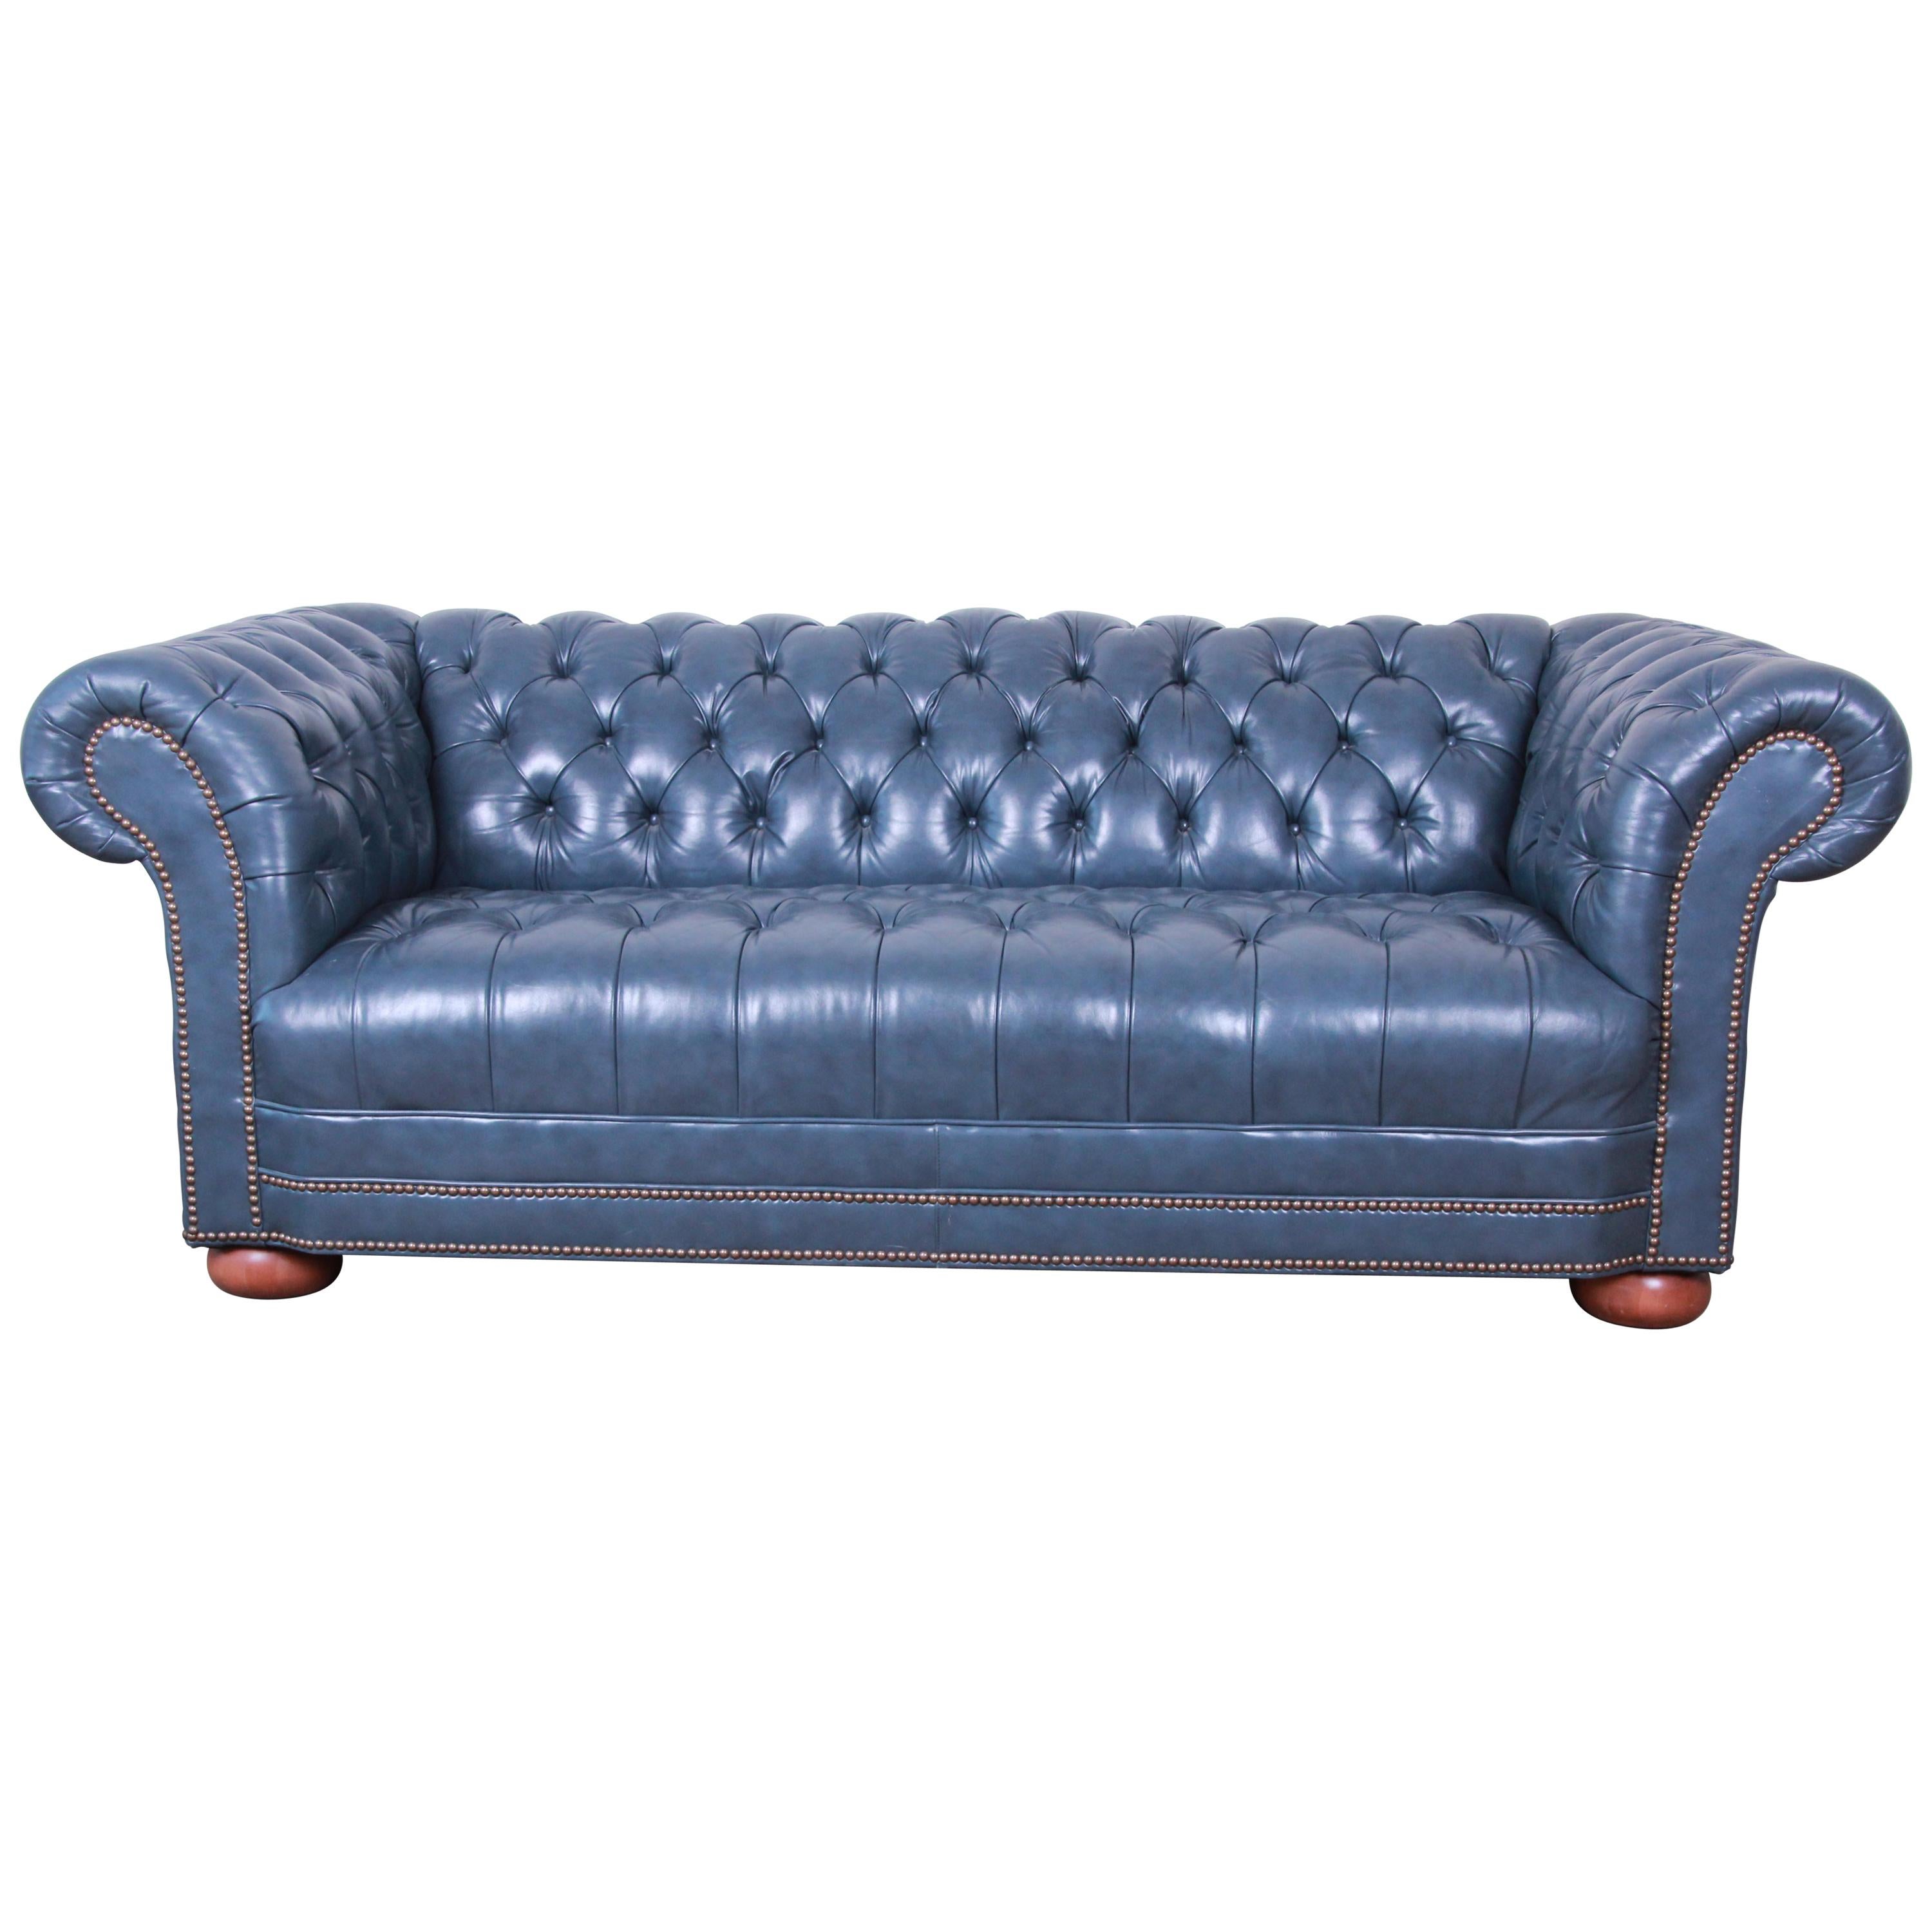 Vintage Tufted Blue Leather Chesterfield Sofa